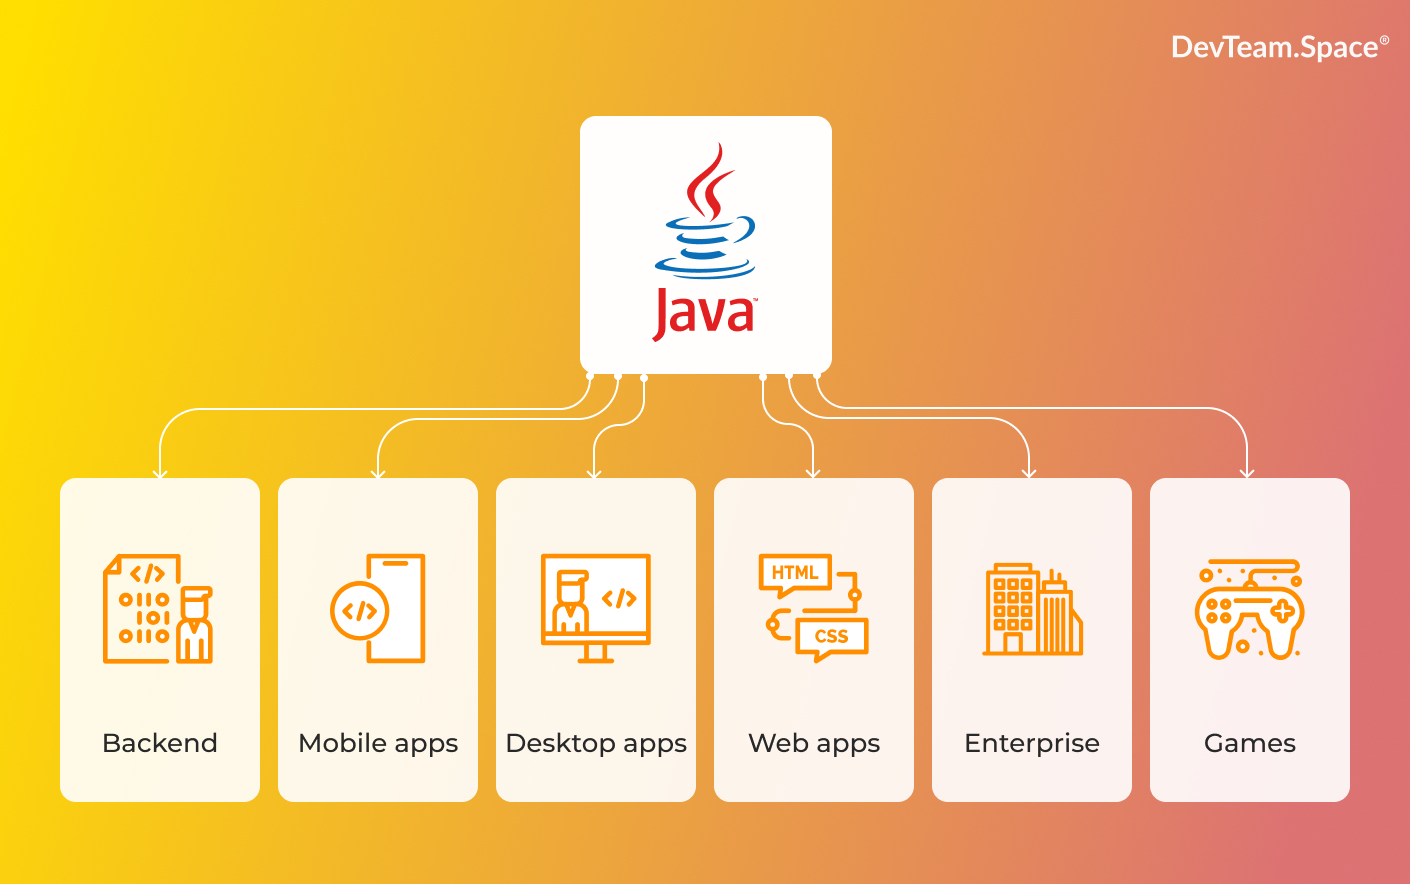 An image showing the Java programming language logo and icons of software solutions that can be built with Java, including backend, mobile apps, desktop apps, web apps, enterprise software, and games.